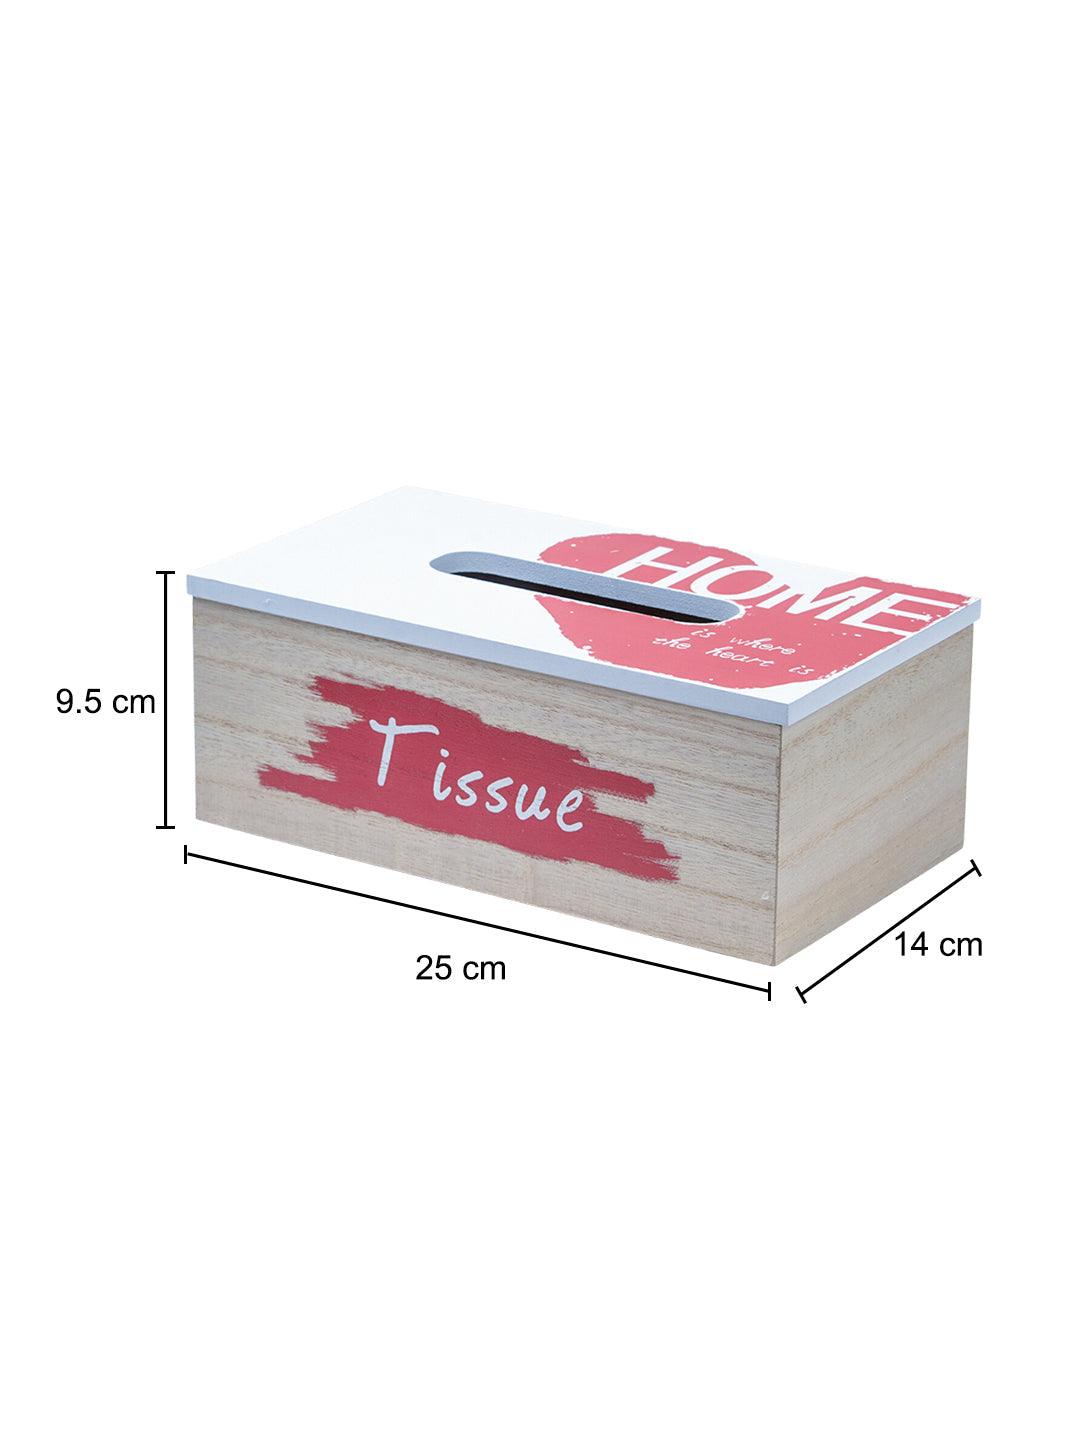 Exquisite White & Red Tissue Holder Box For Home - 6